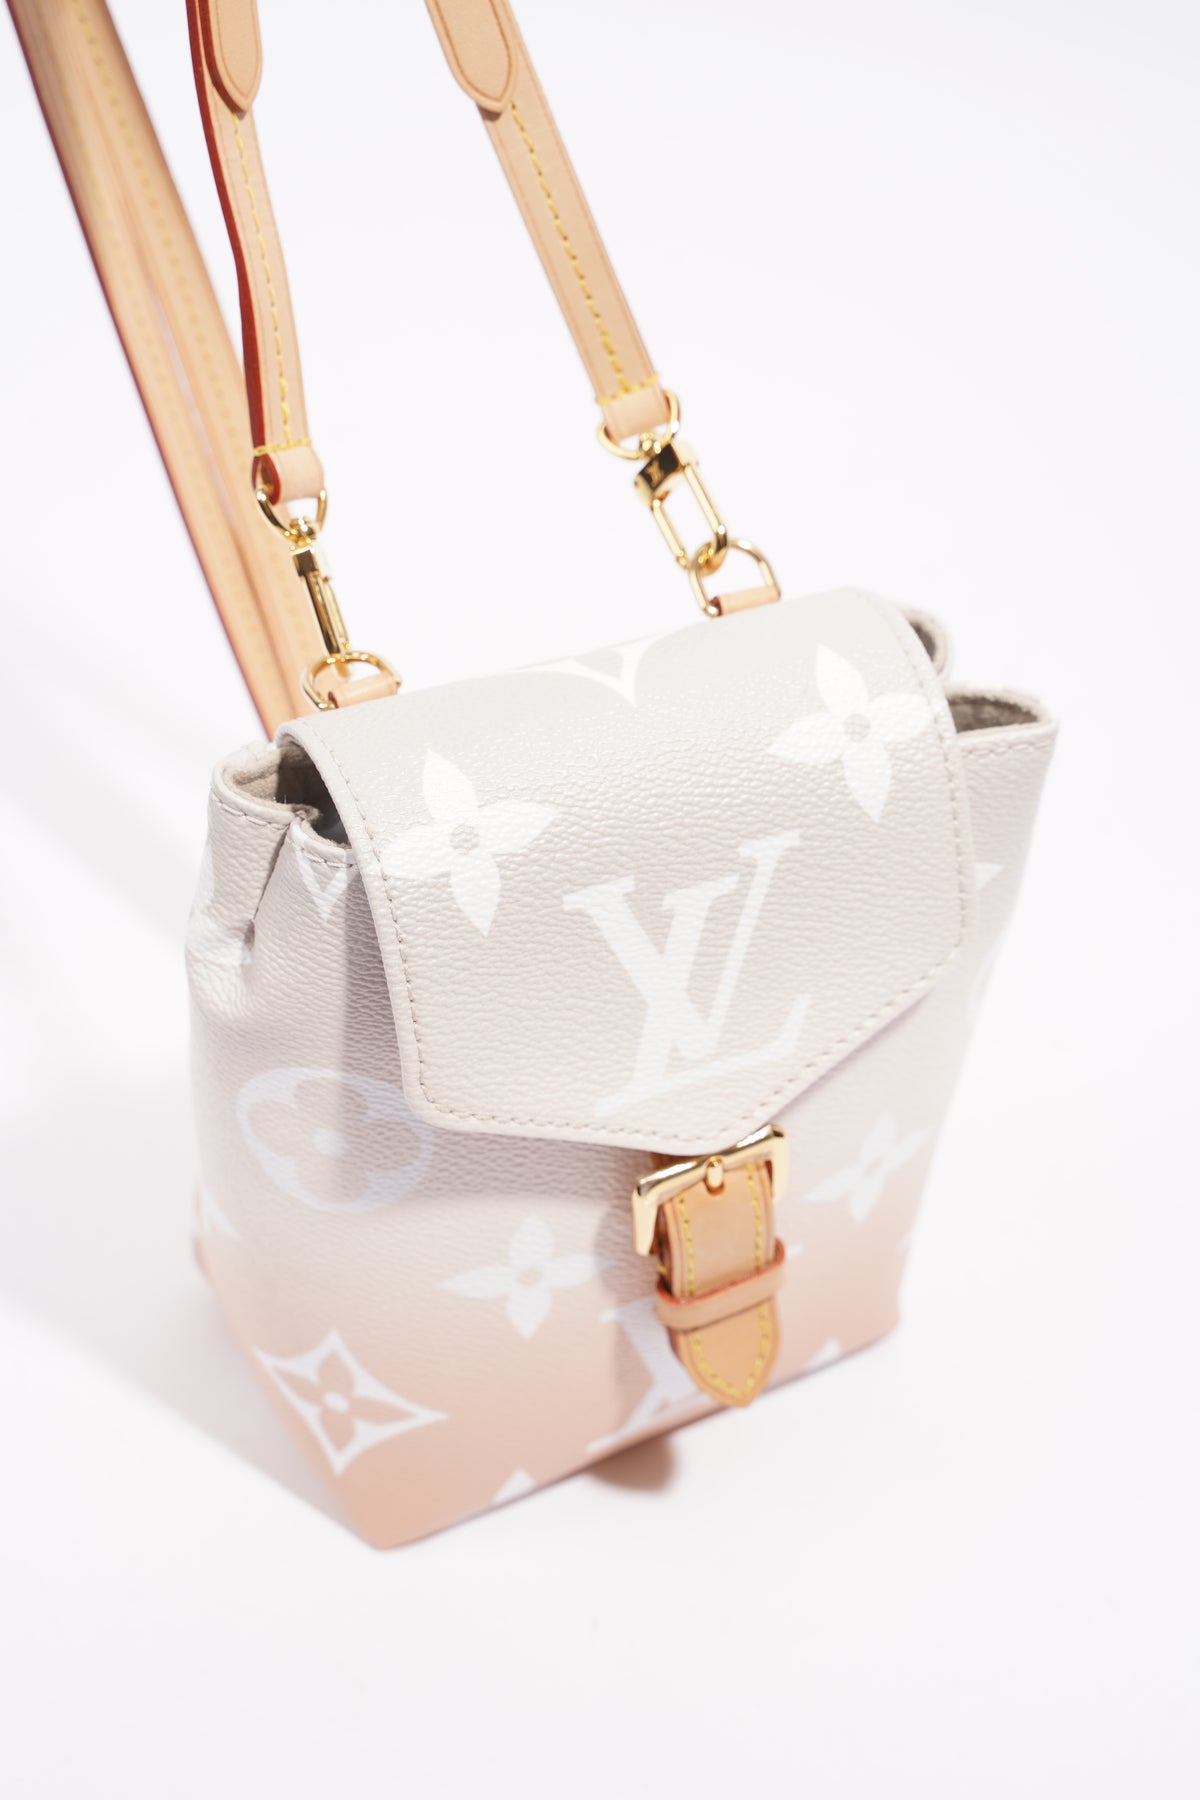 Louis Vuitton Womens Tiny Backpack By The Pool – Luxe Collective